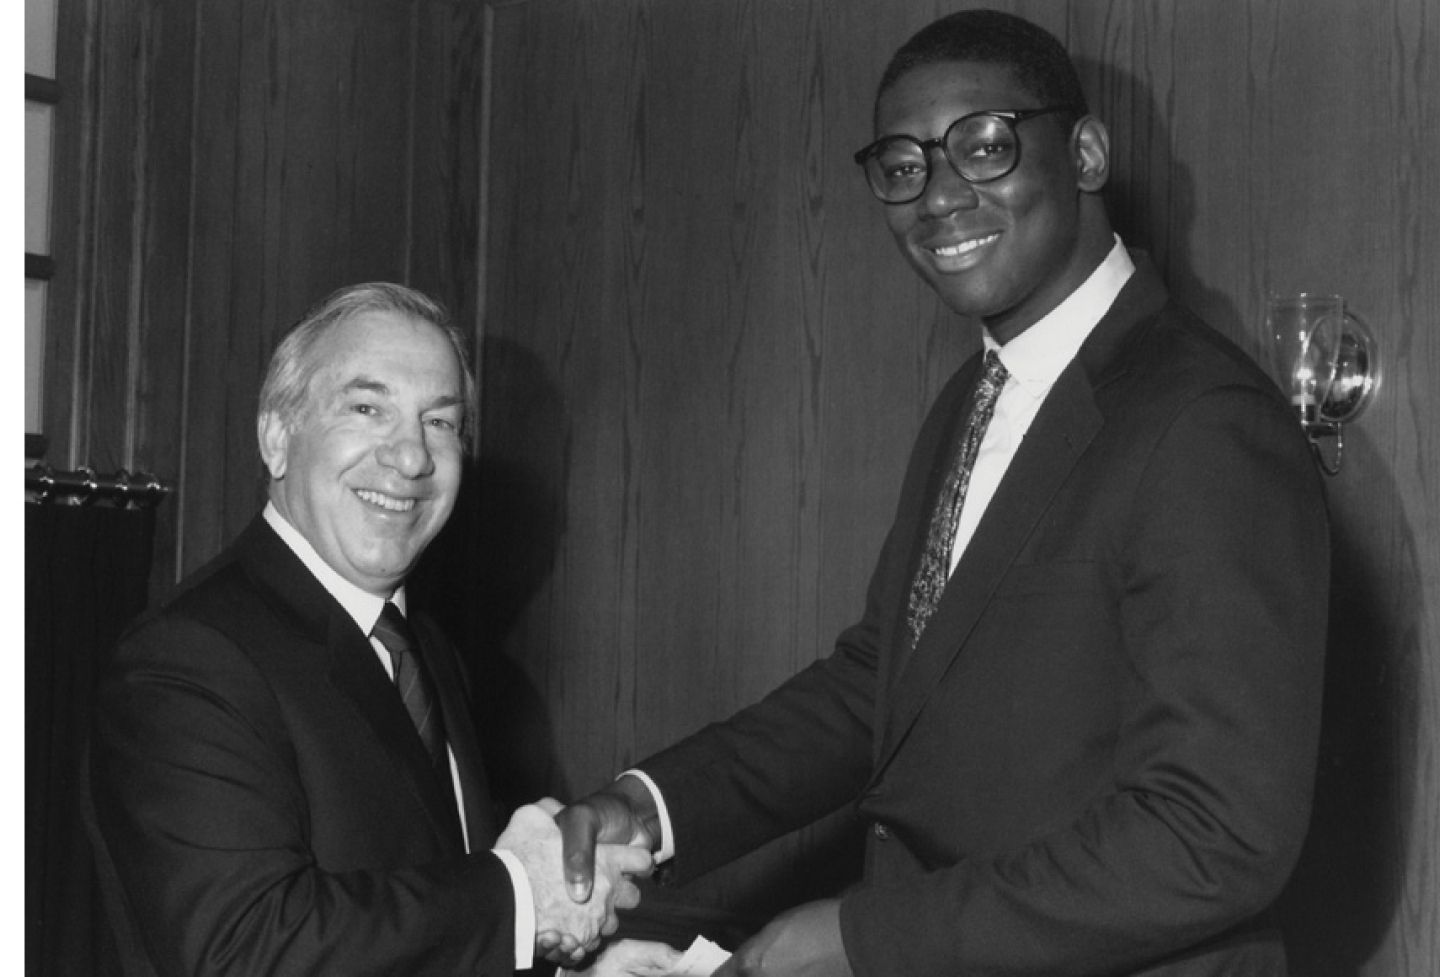 Daniel Rosenbloom ’54 shakes hands with Stephen F. Smith ’92, the first recipient of the Rosenbloom Award, given to a student with a strong academic record who supports or assists other students. Smith later became the John V. Ray Research Professor at UVA Law, and has been a professor at Notre Dame Law School since 2009. 